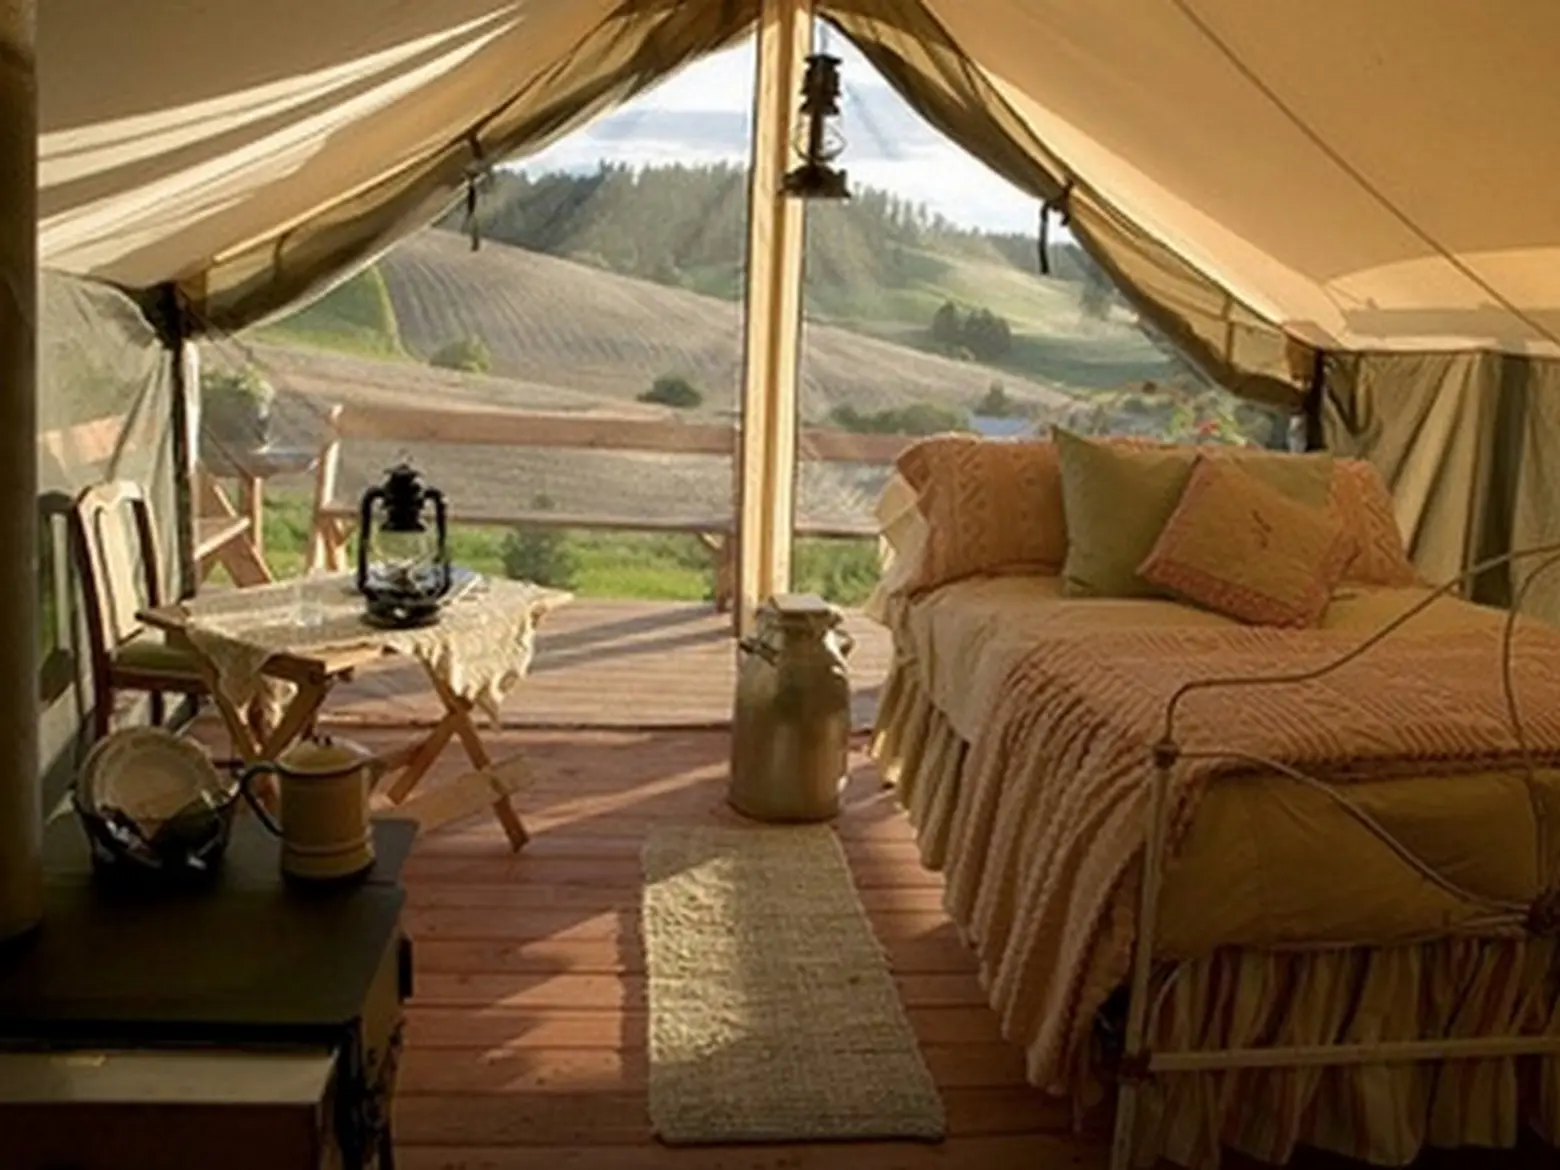 cozy canvas glamping